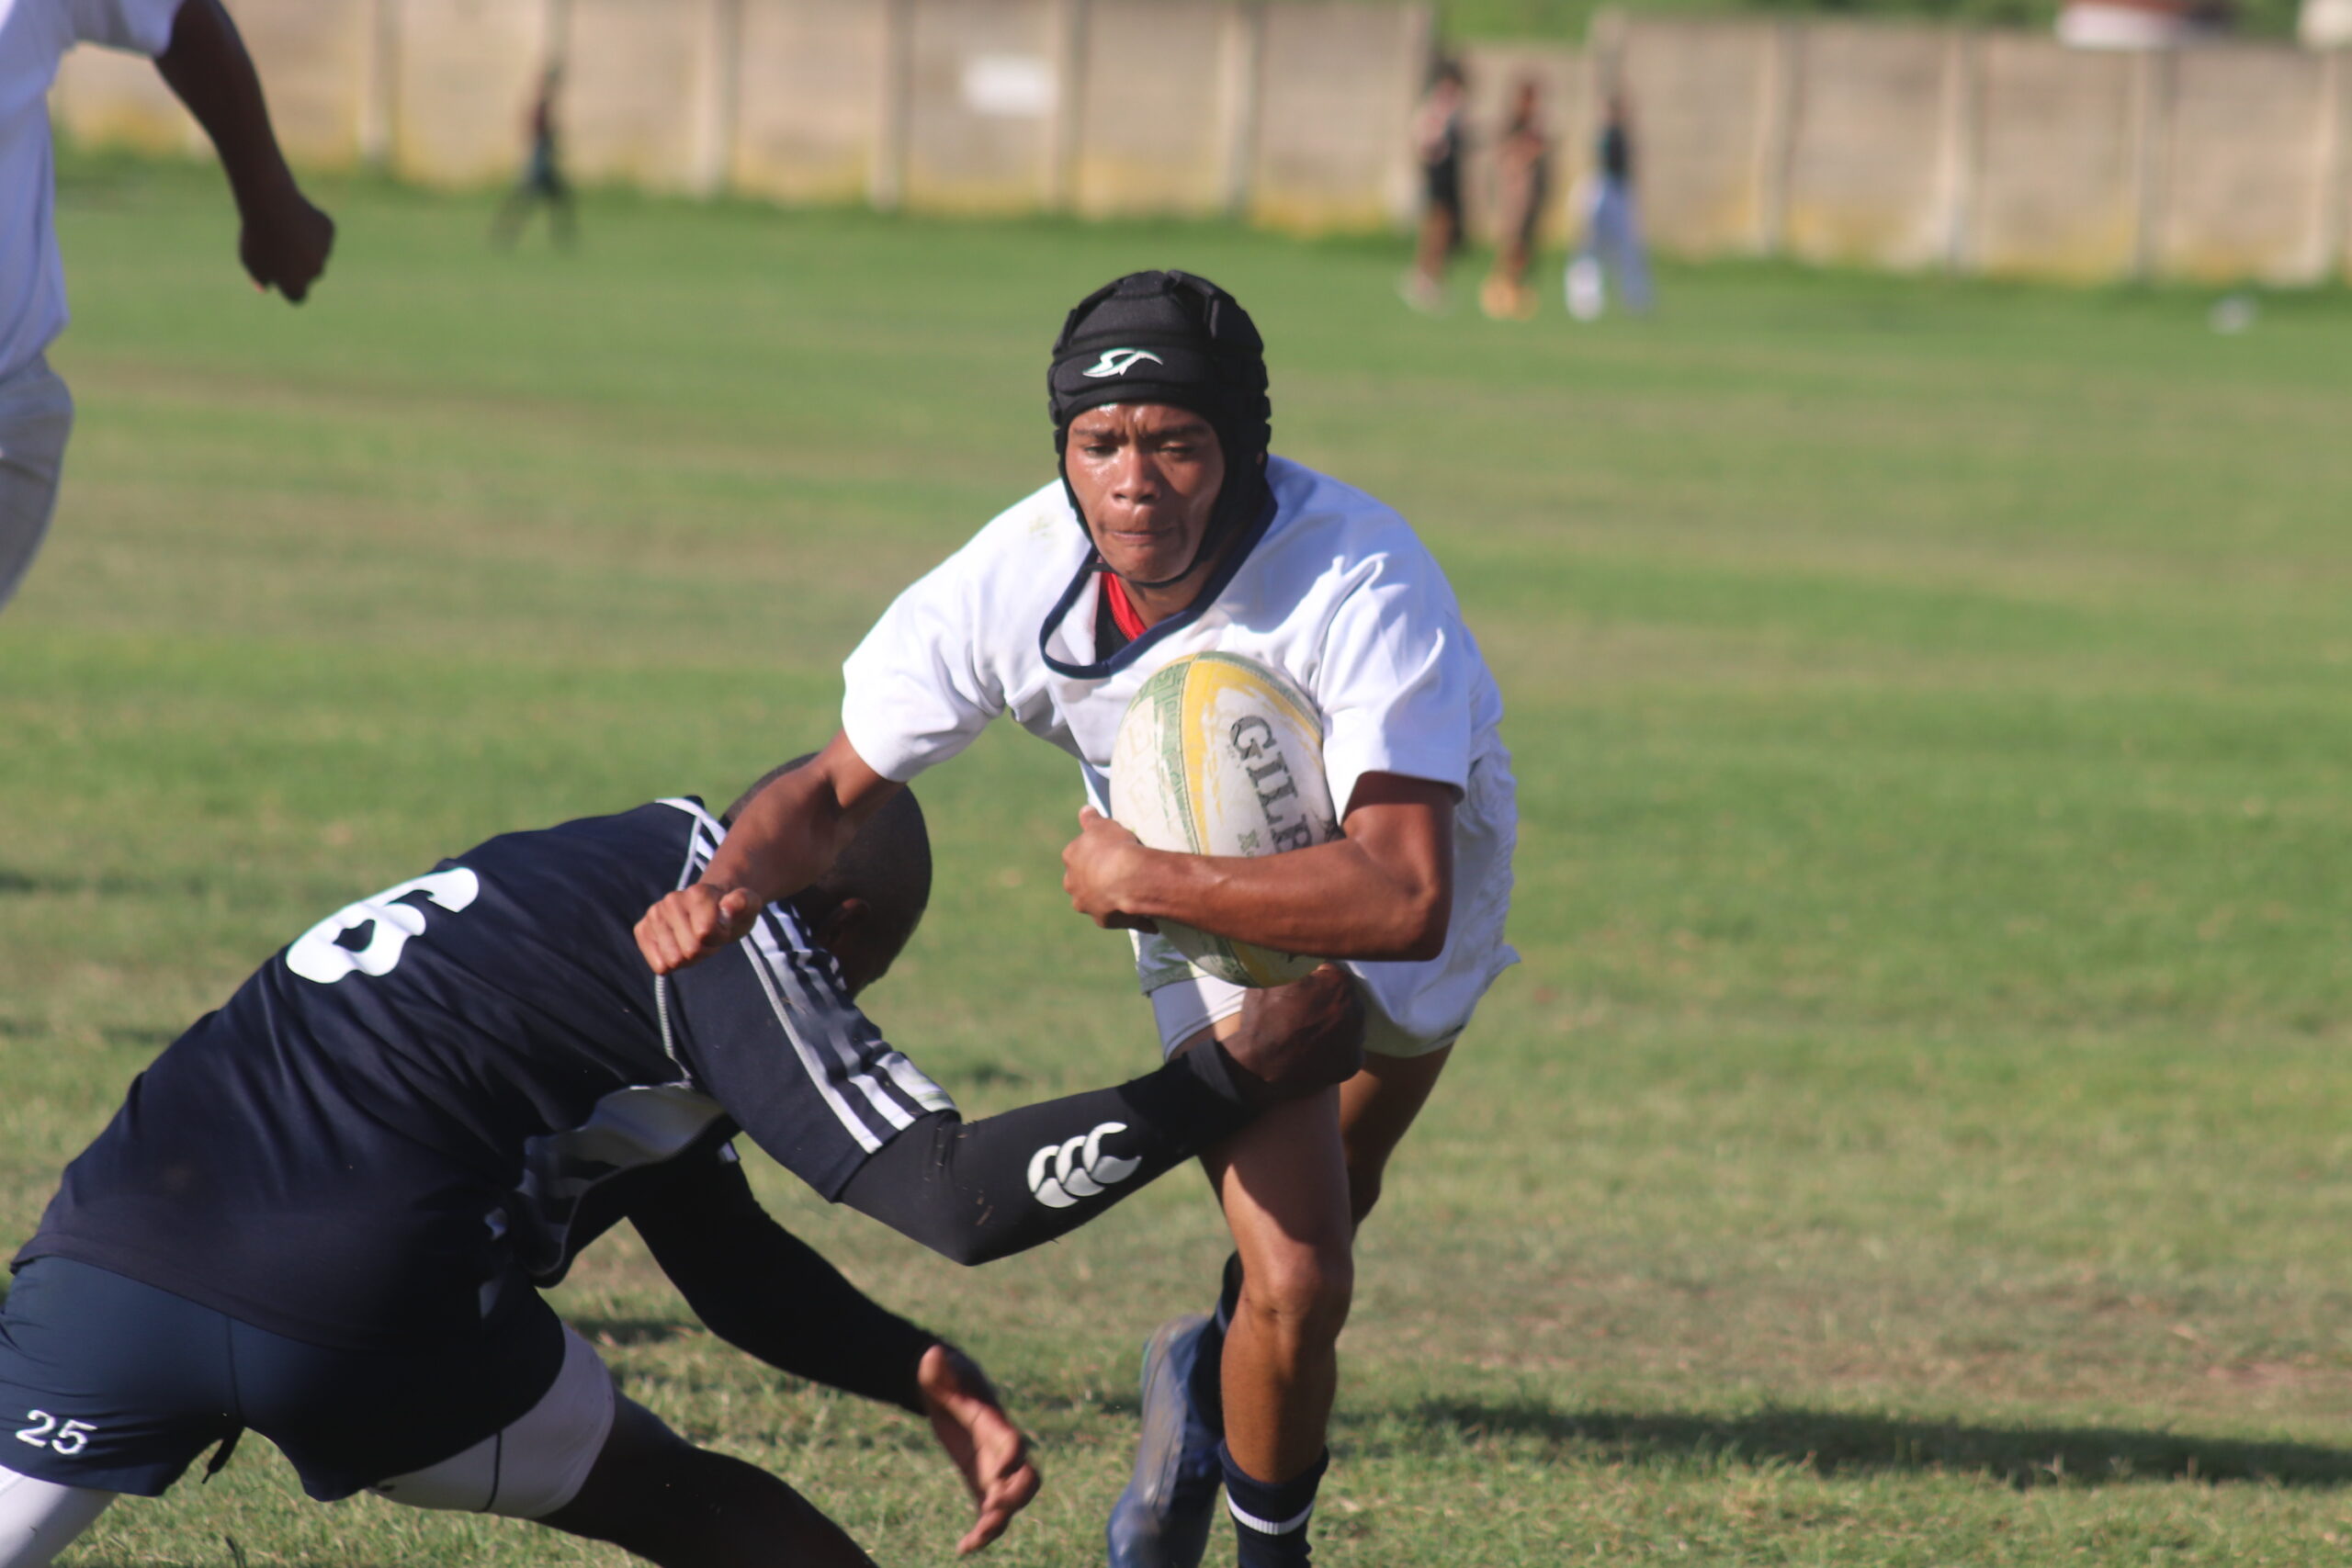 Young Swallows flyhalf Ethan Williams breaks through a tackle on attack. Photo: Chesley Daniels